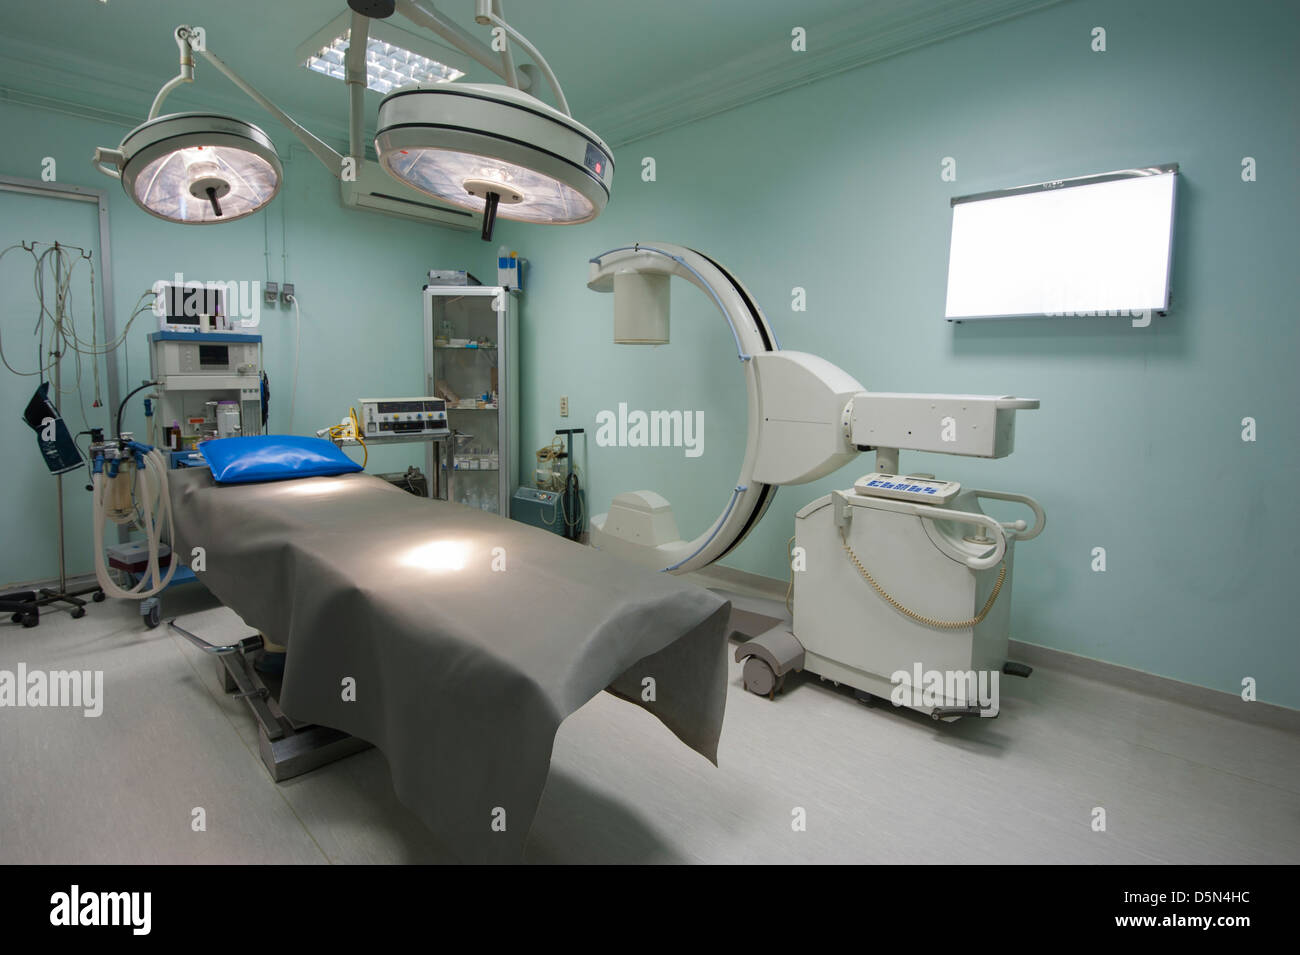 Emergency operating room in a medical centre hospital with scanning equipment Stock Photo